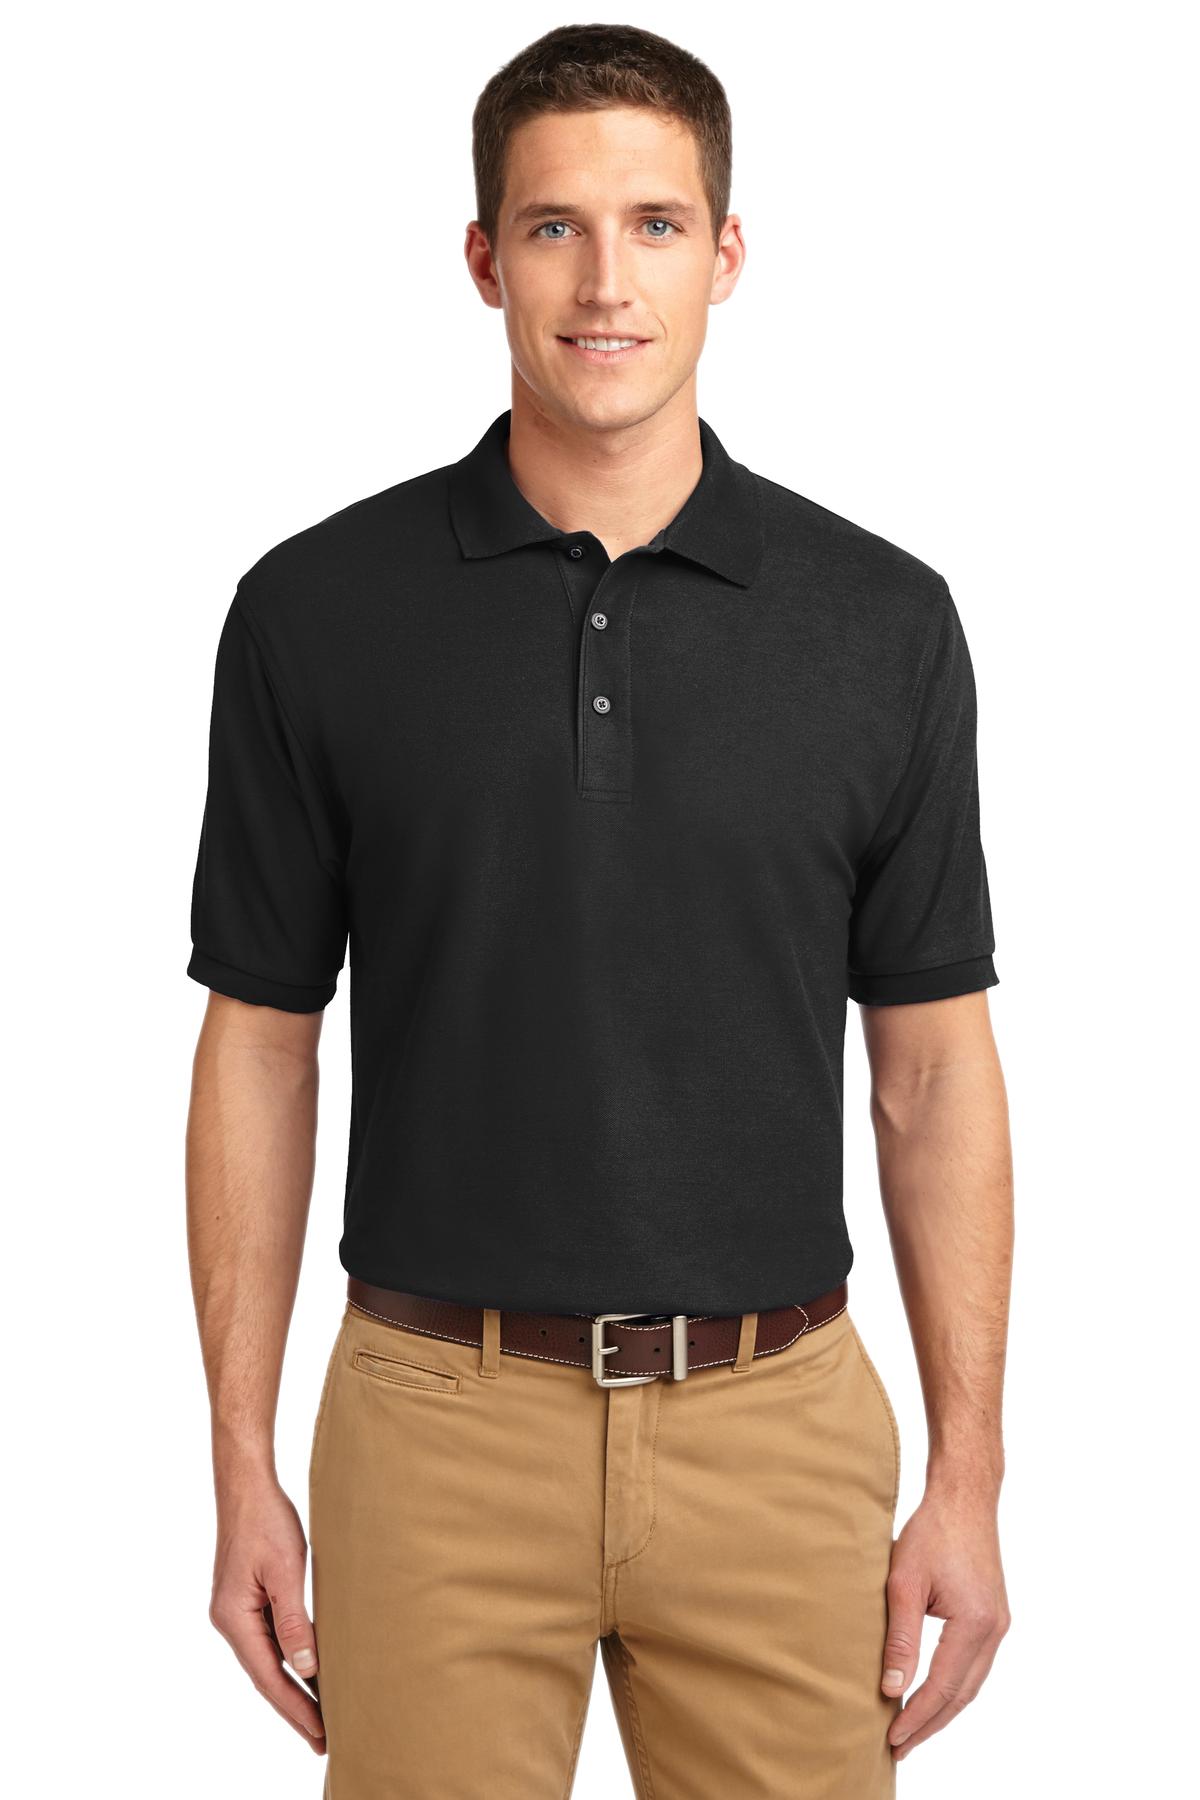 Port Authority Hospitality Polos & Knits ® Silk Touch Polo.-Port Authority